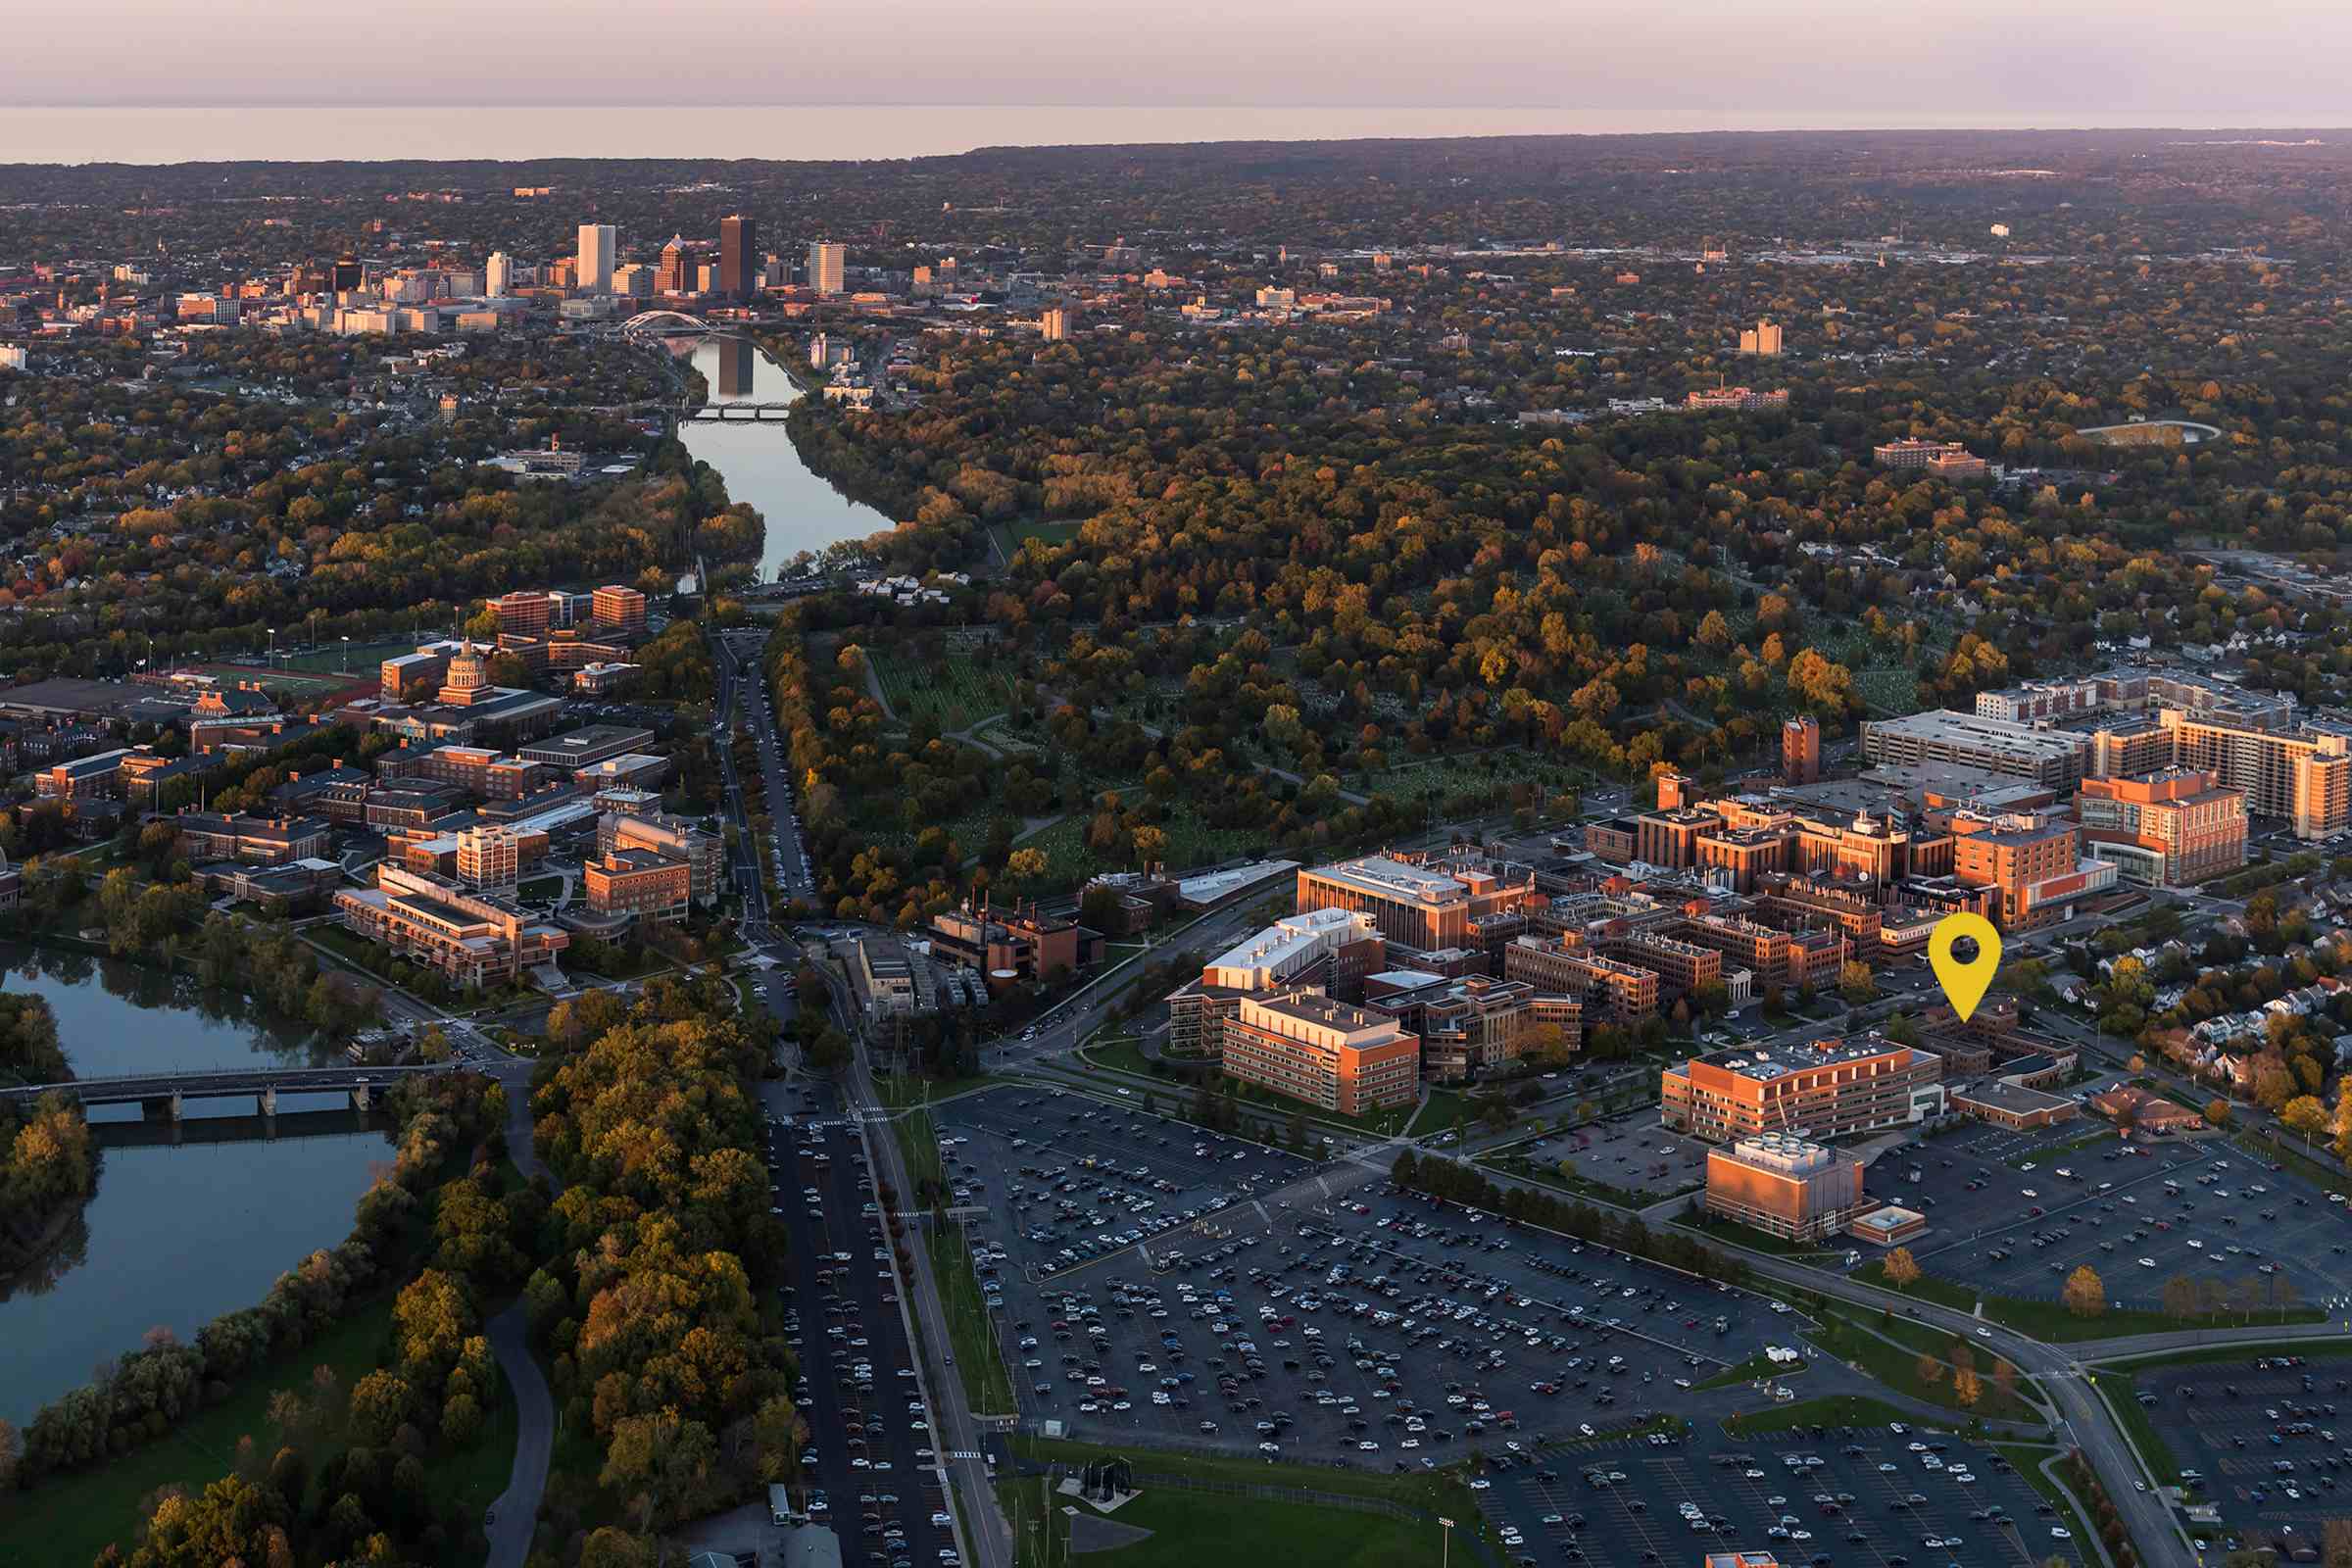 Aerial image of the University of Rochester campus